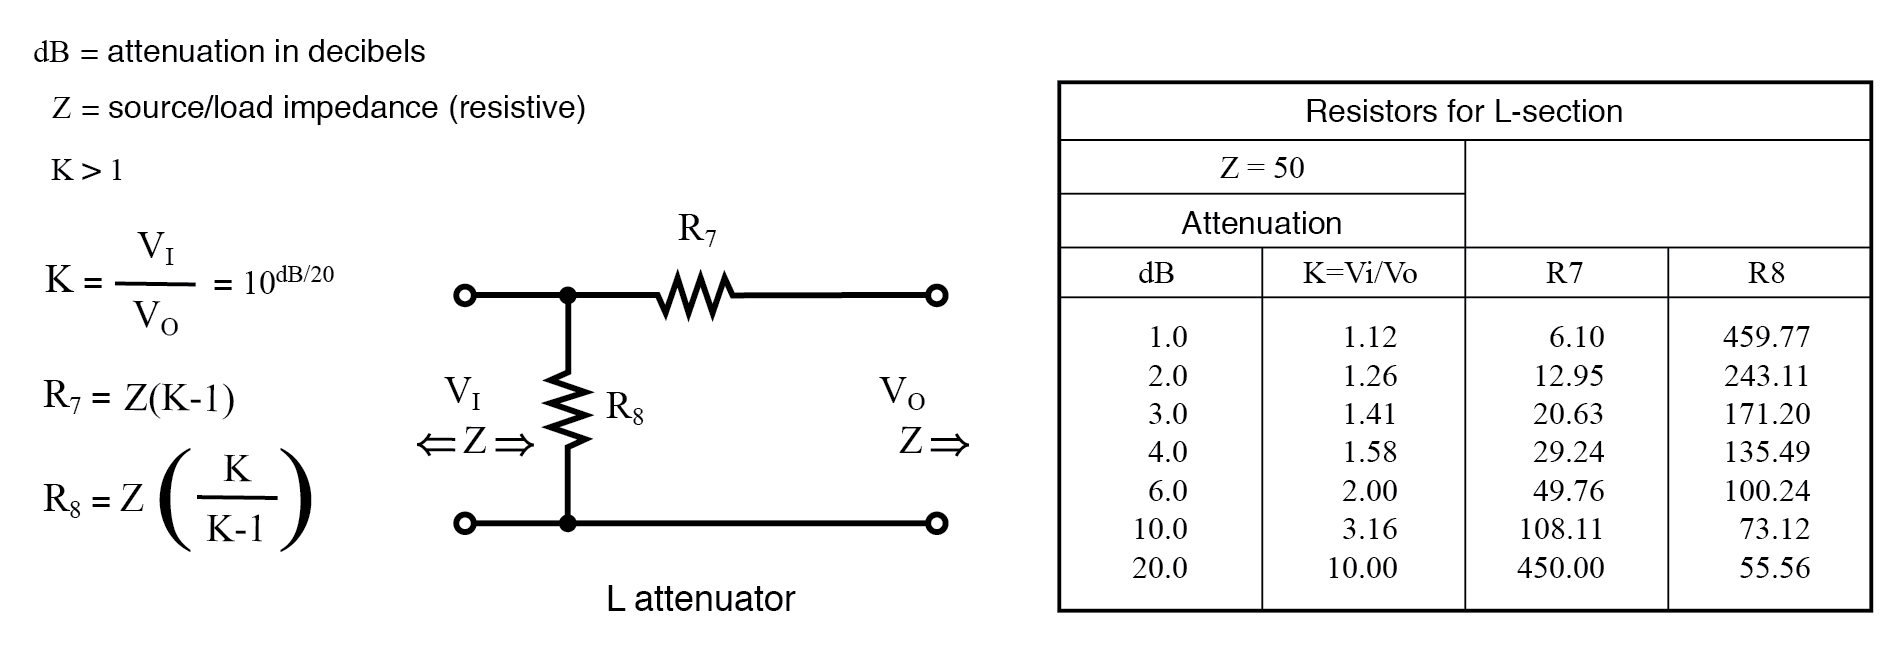 Alternate form L-section attenuator table for 50 Ω source and load impedance.